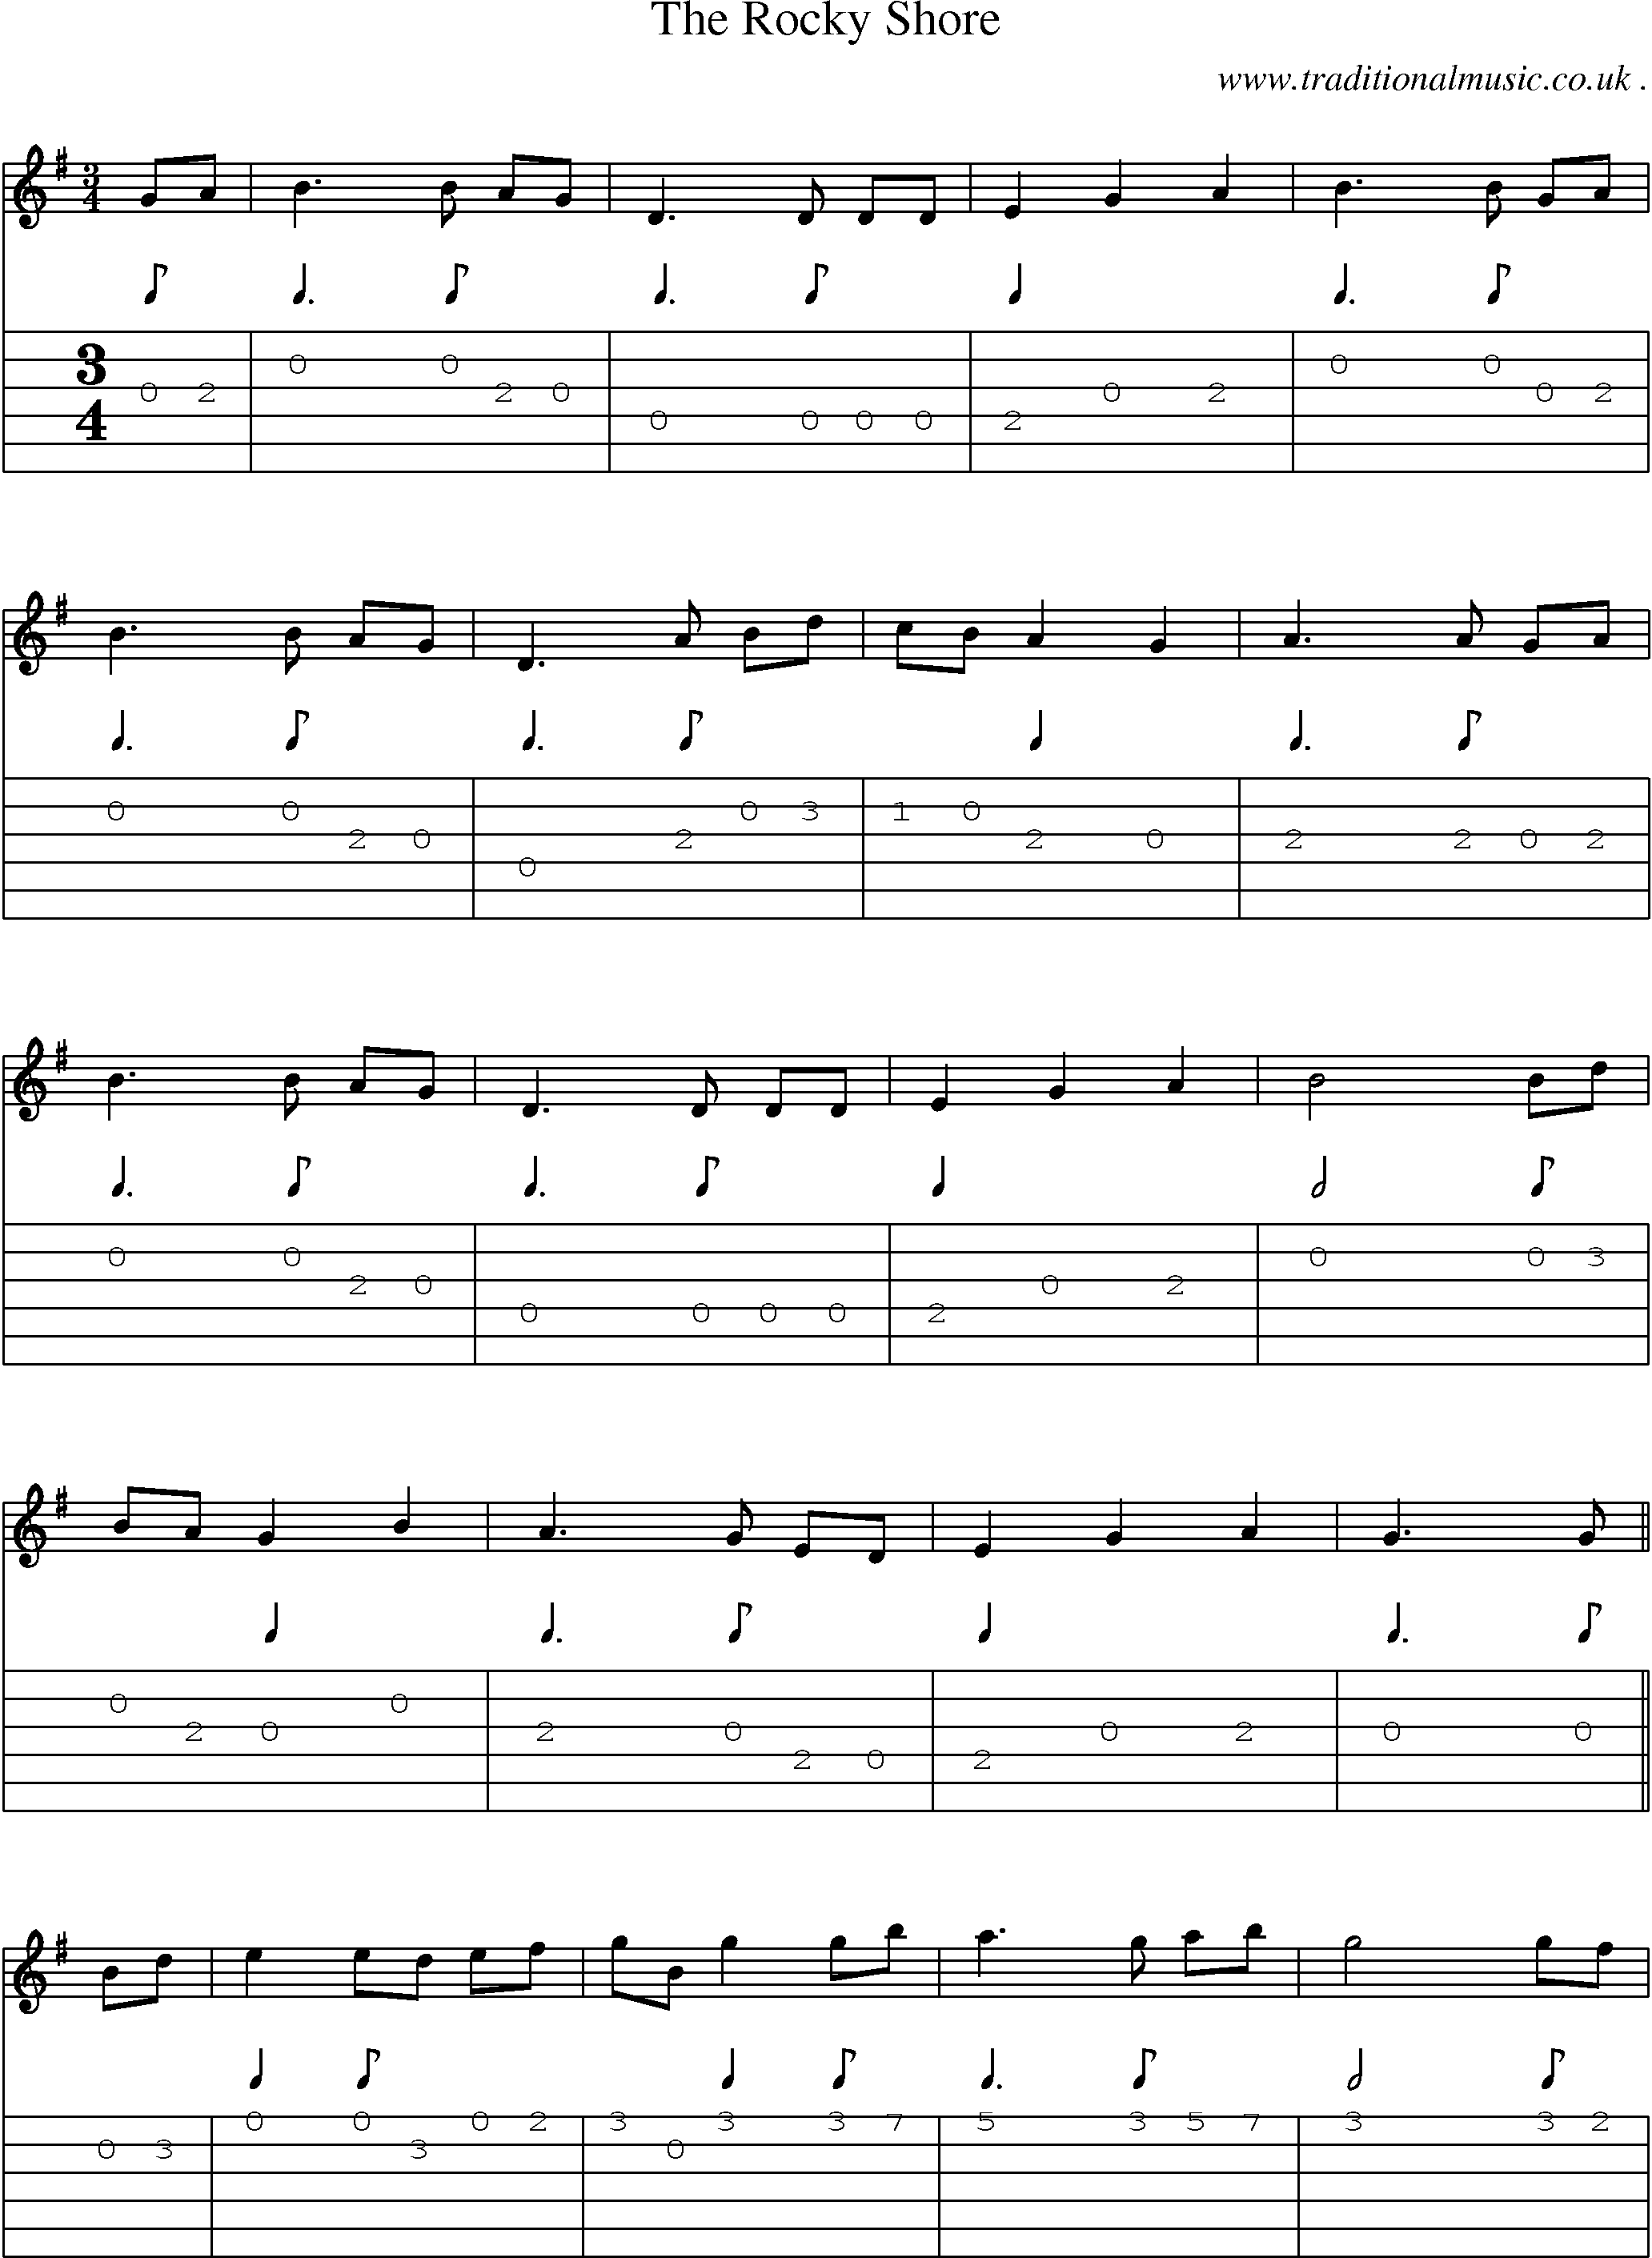 Sheet-Music and Guitar Tabs for The Rocky Shore